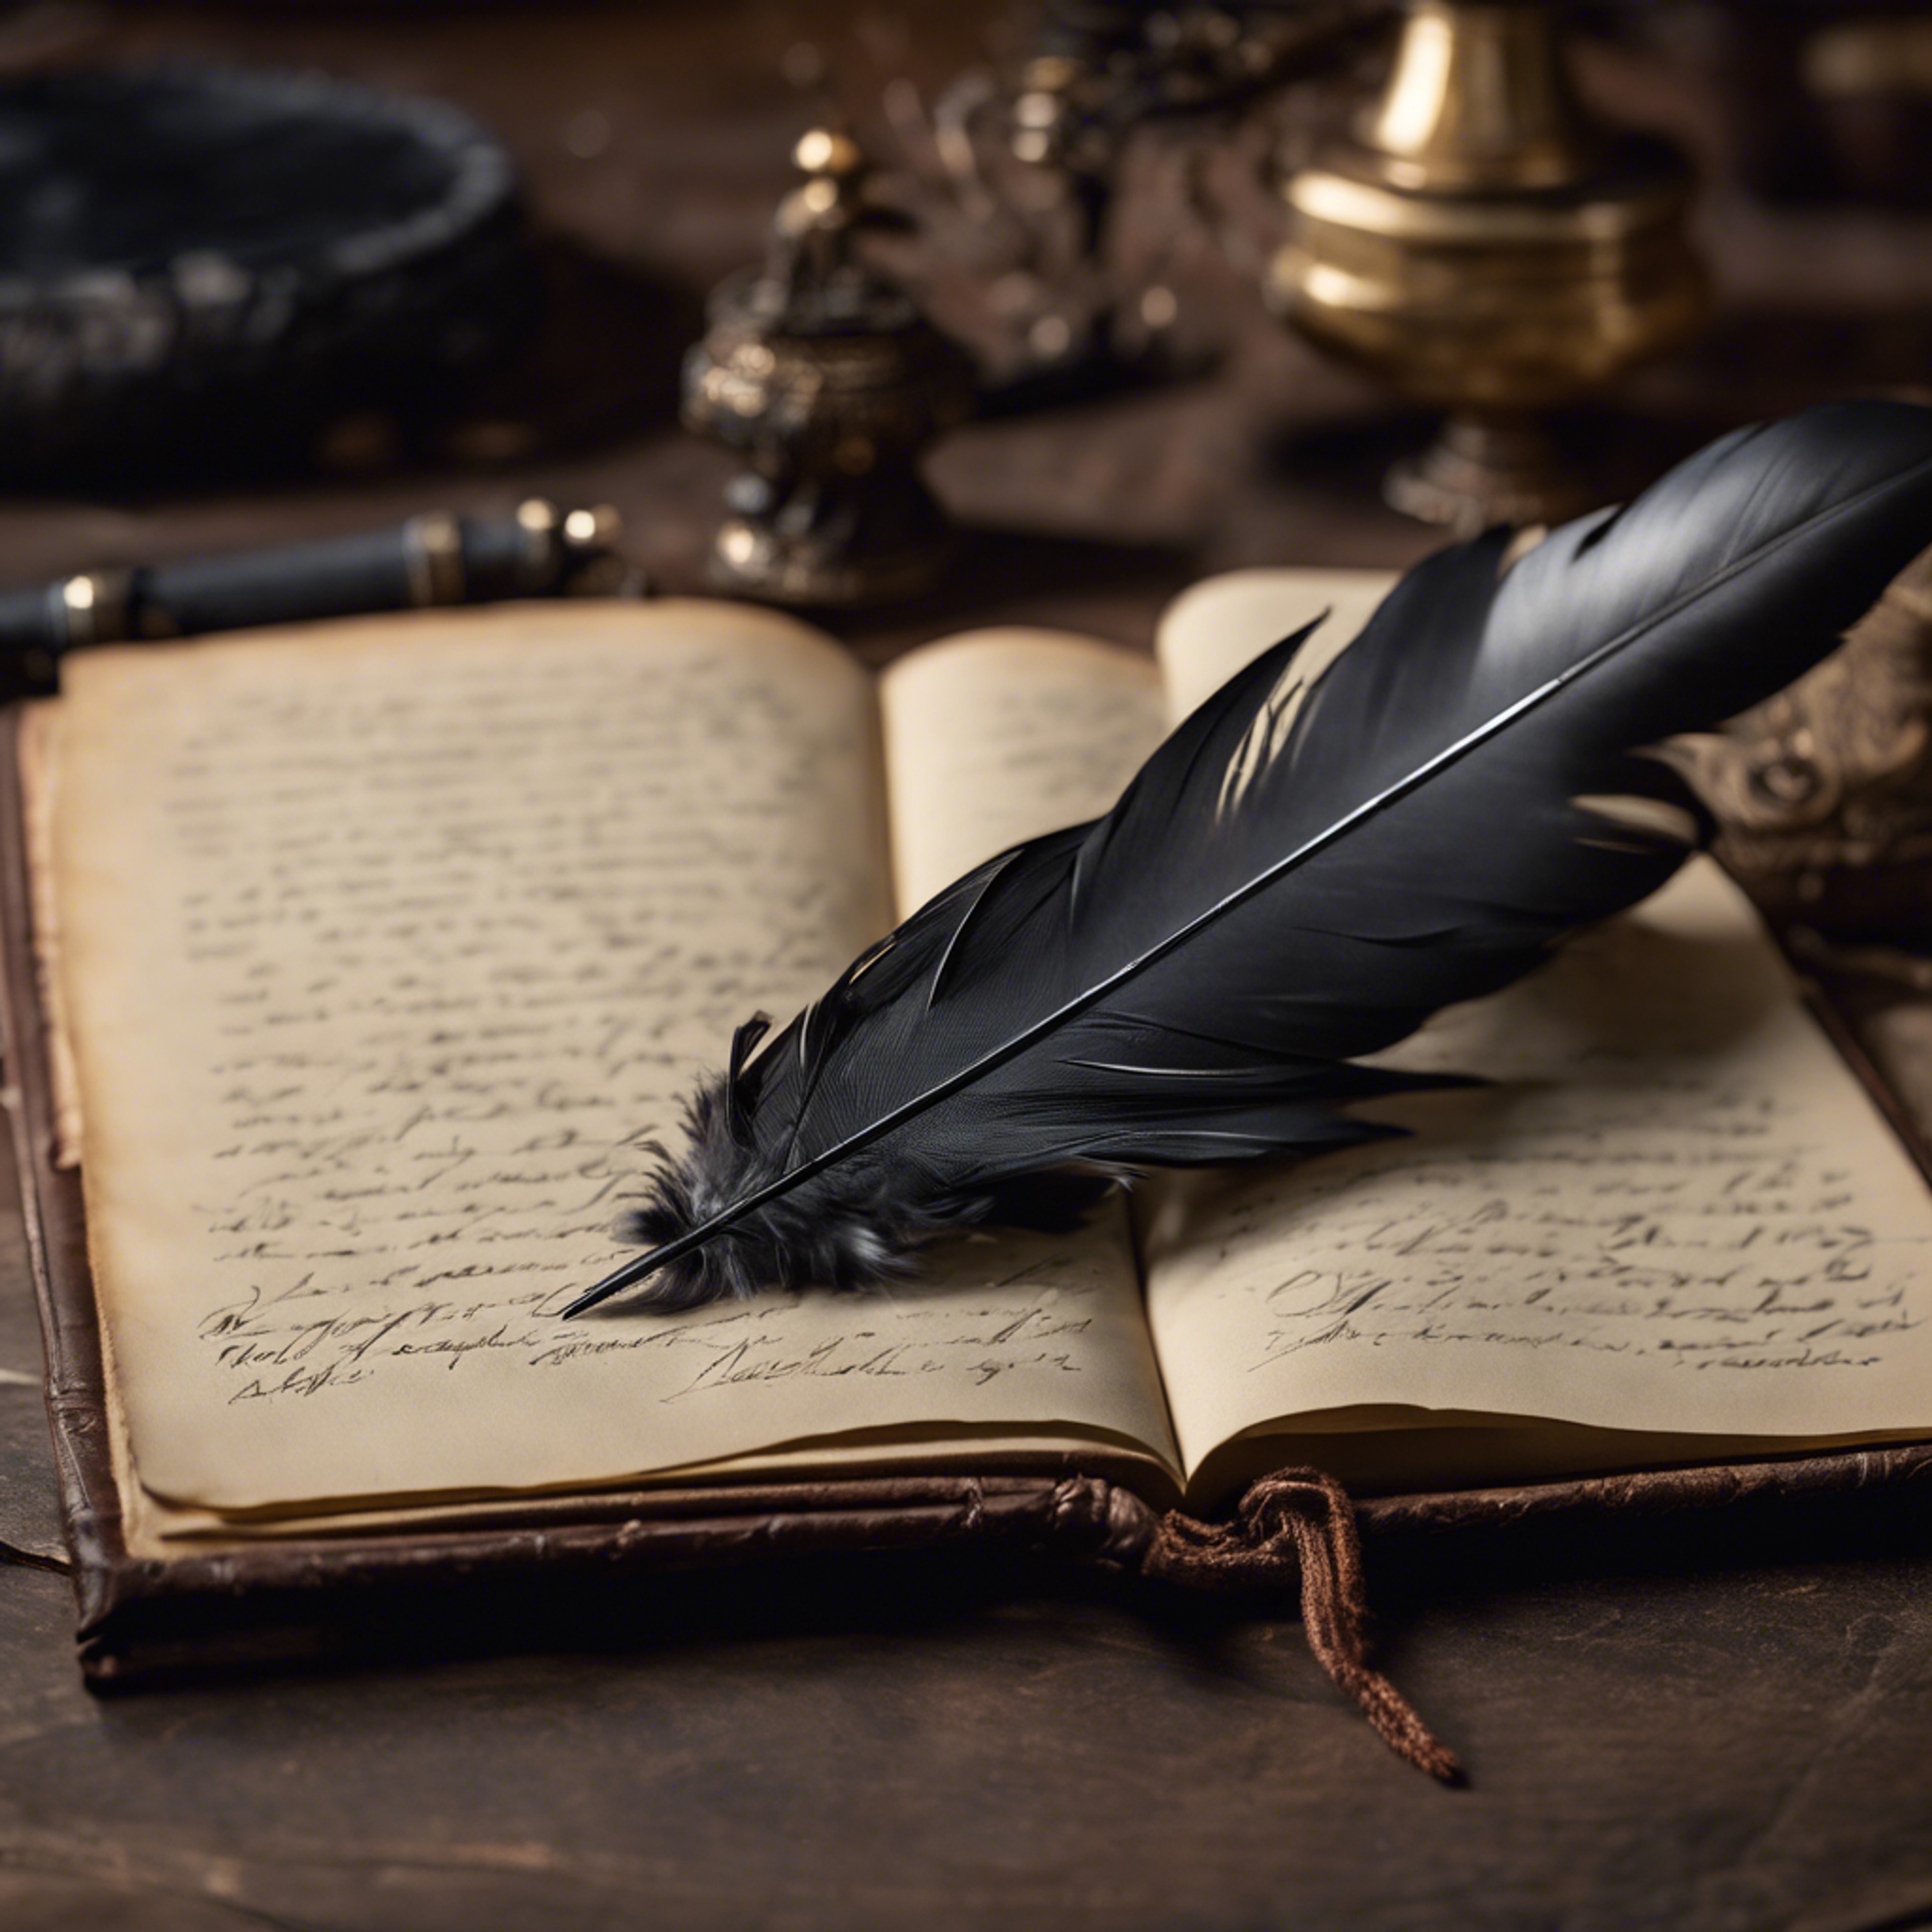 A black feather quill pen poised to write in an antique leather-bound journal. Ფონი[1a576fd5c1f949af9941]